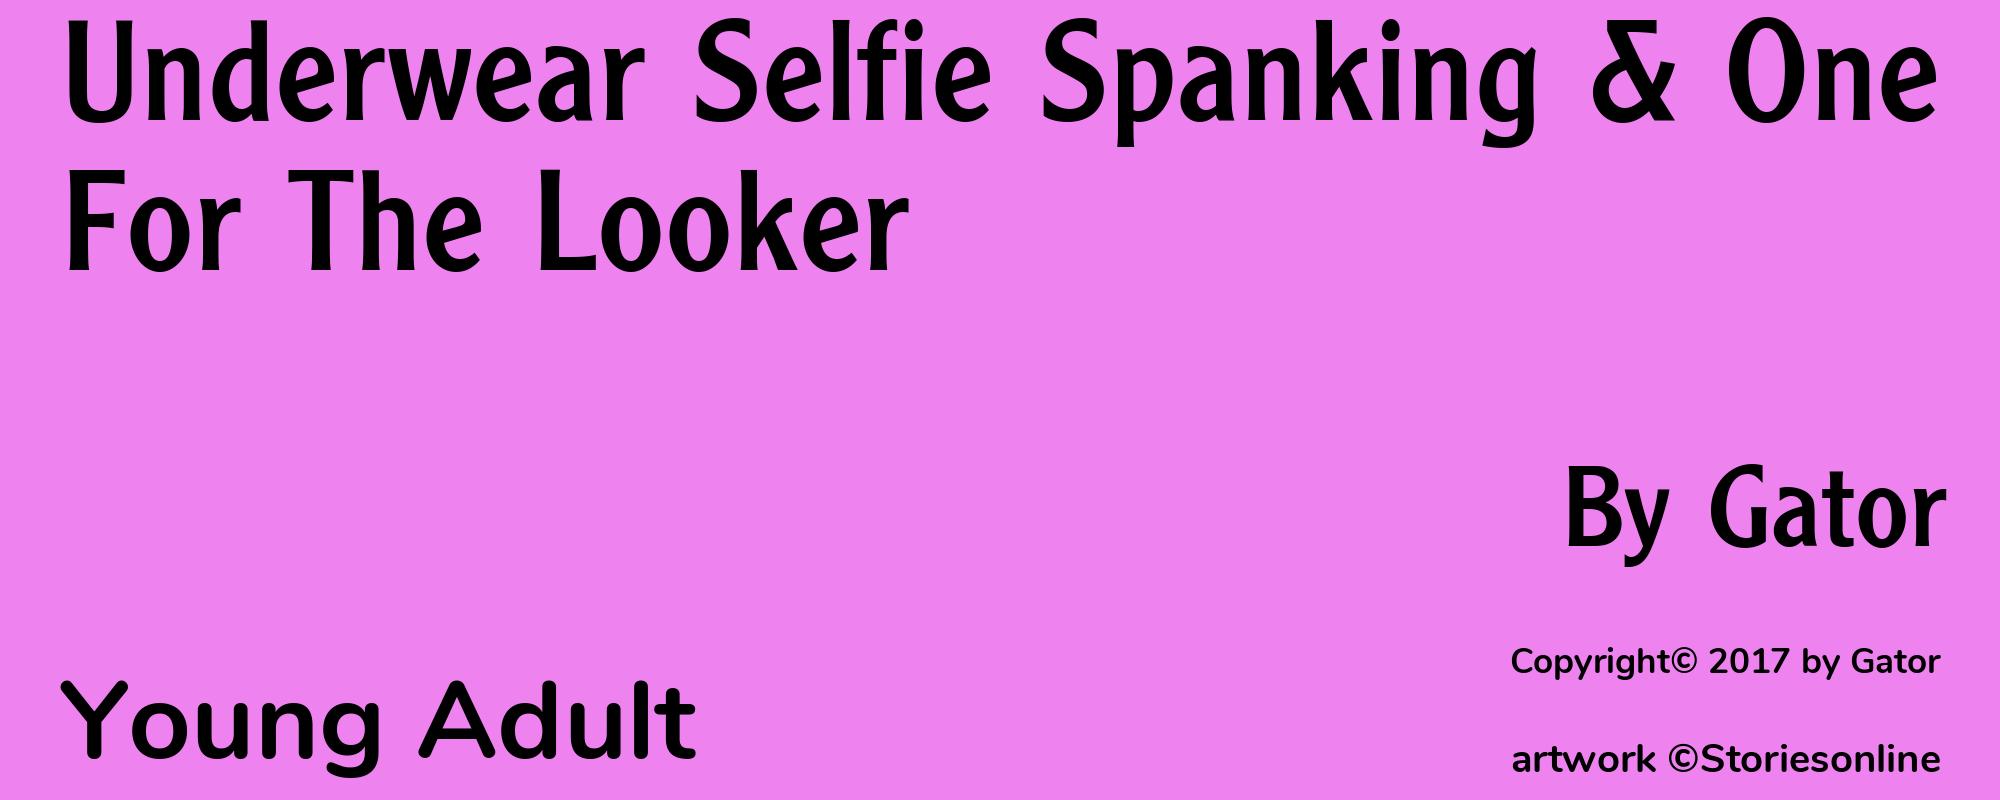 Underwear Selfie Spanking & One For The Looker - Cover